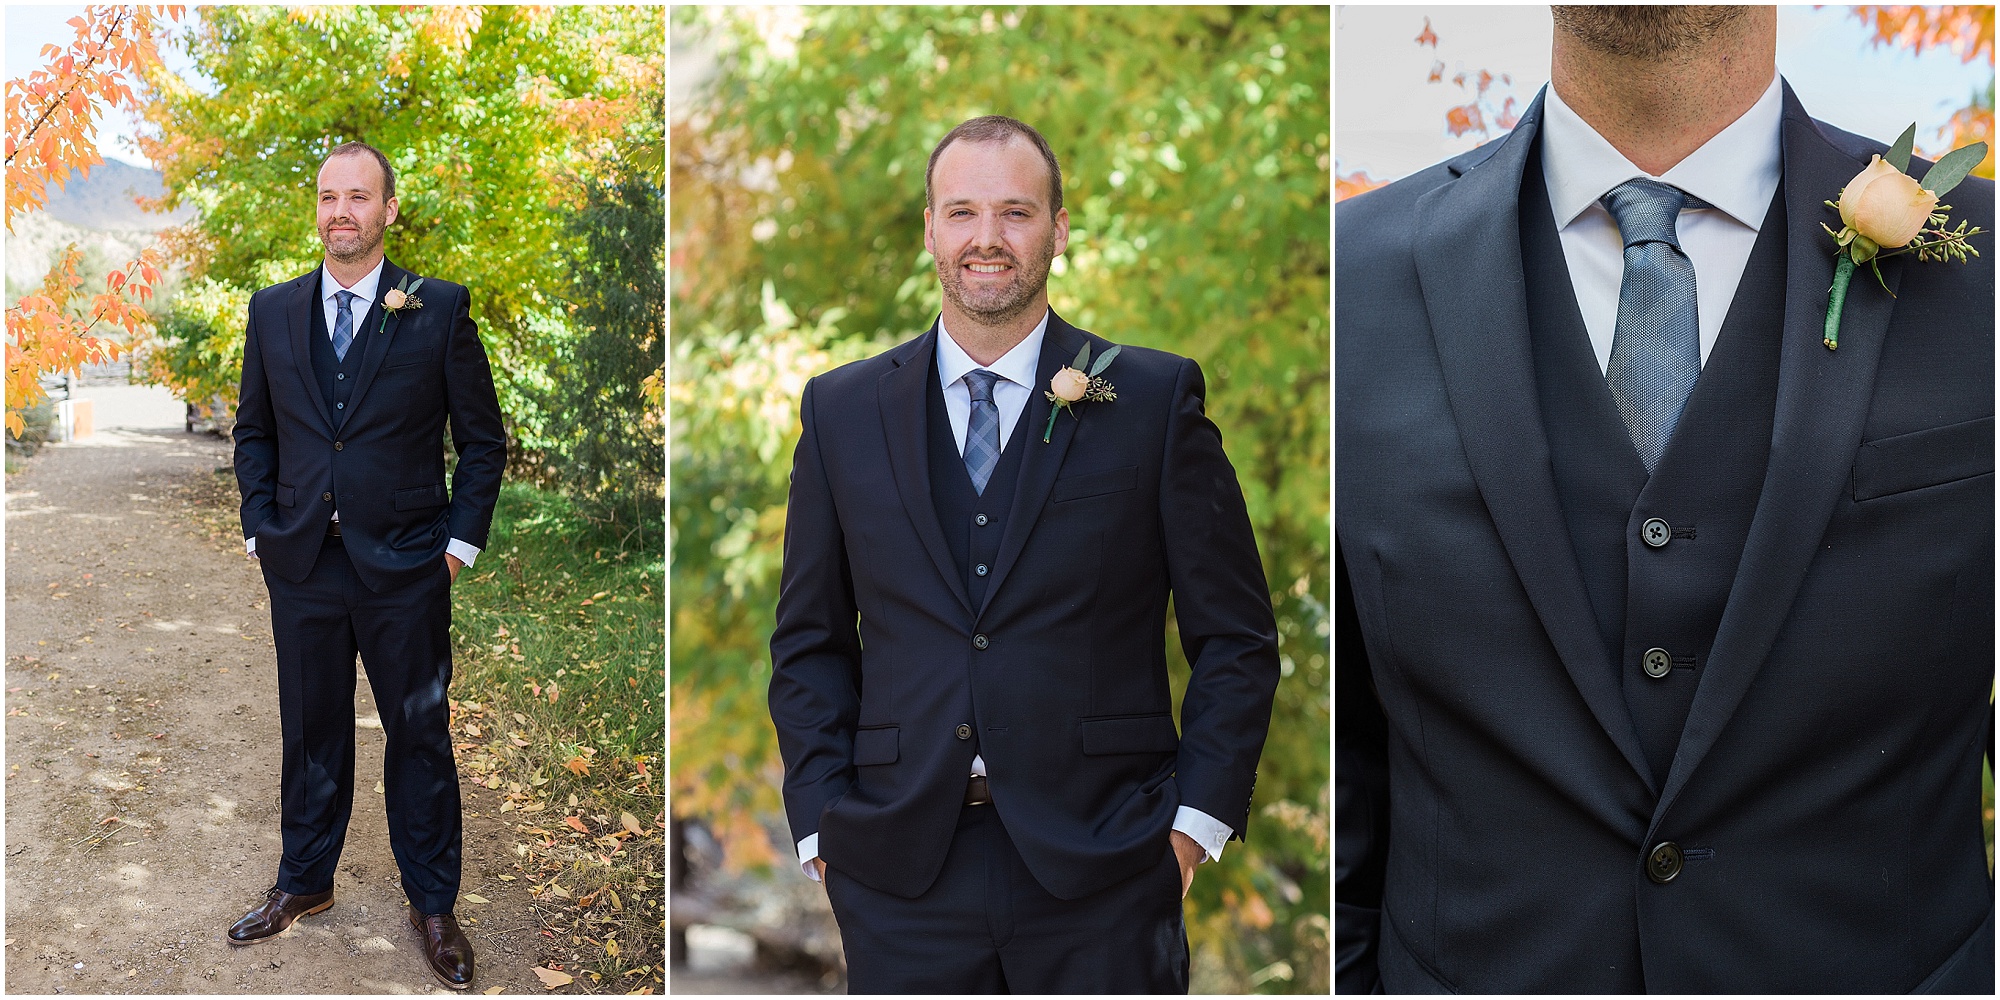 Formal groom portraits among the trees at his Ranch at the Canyons fall wedding in Central Oregon. | Erica Swantek Photography